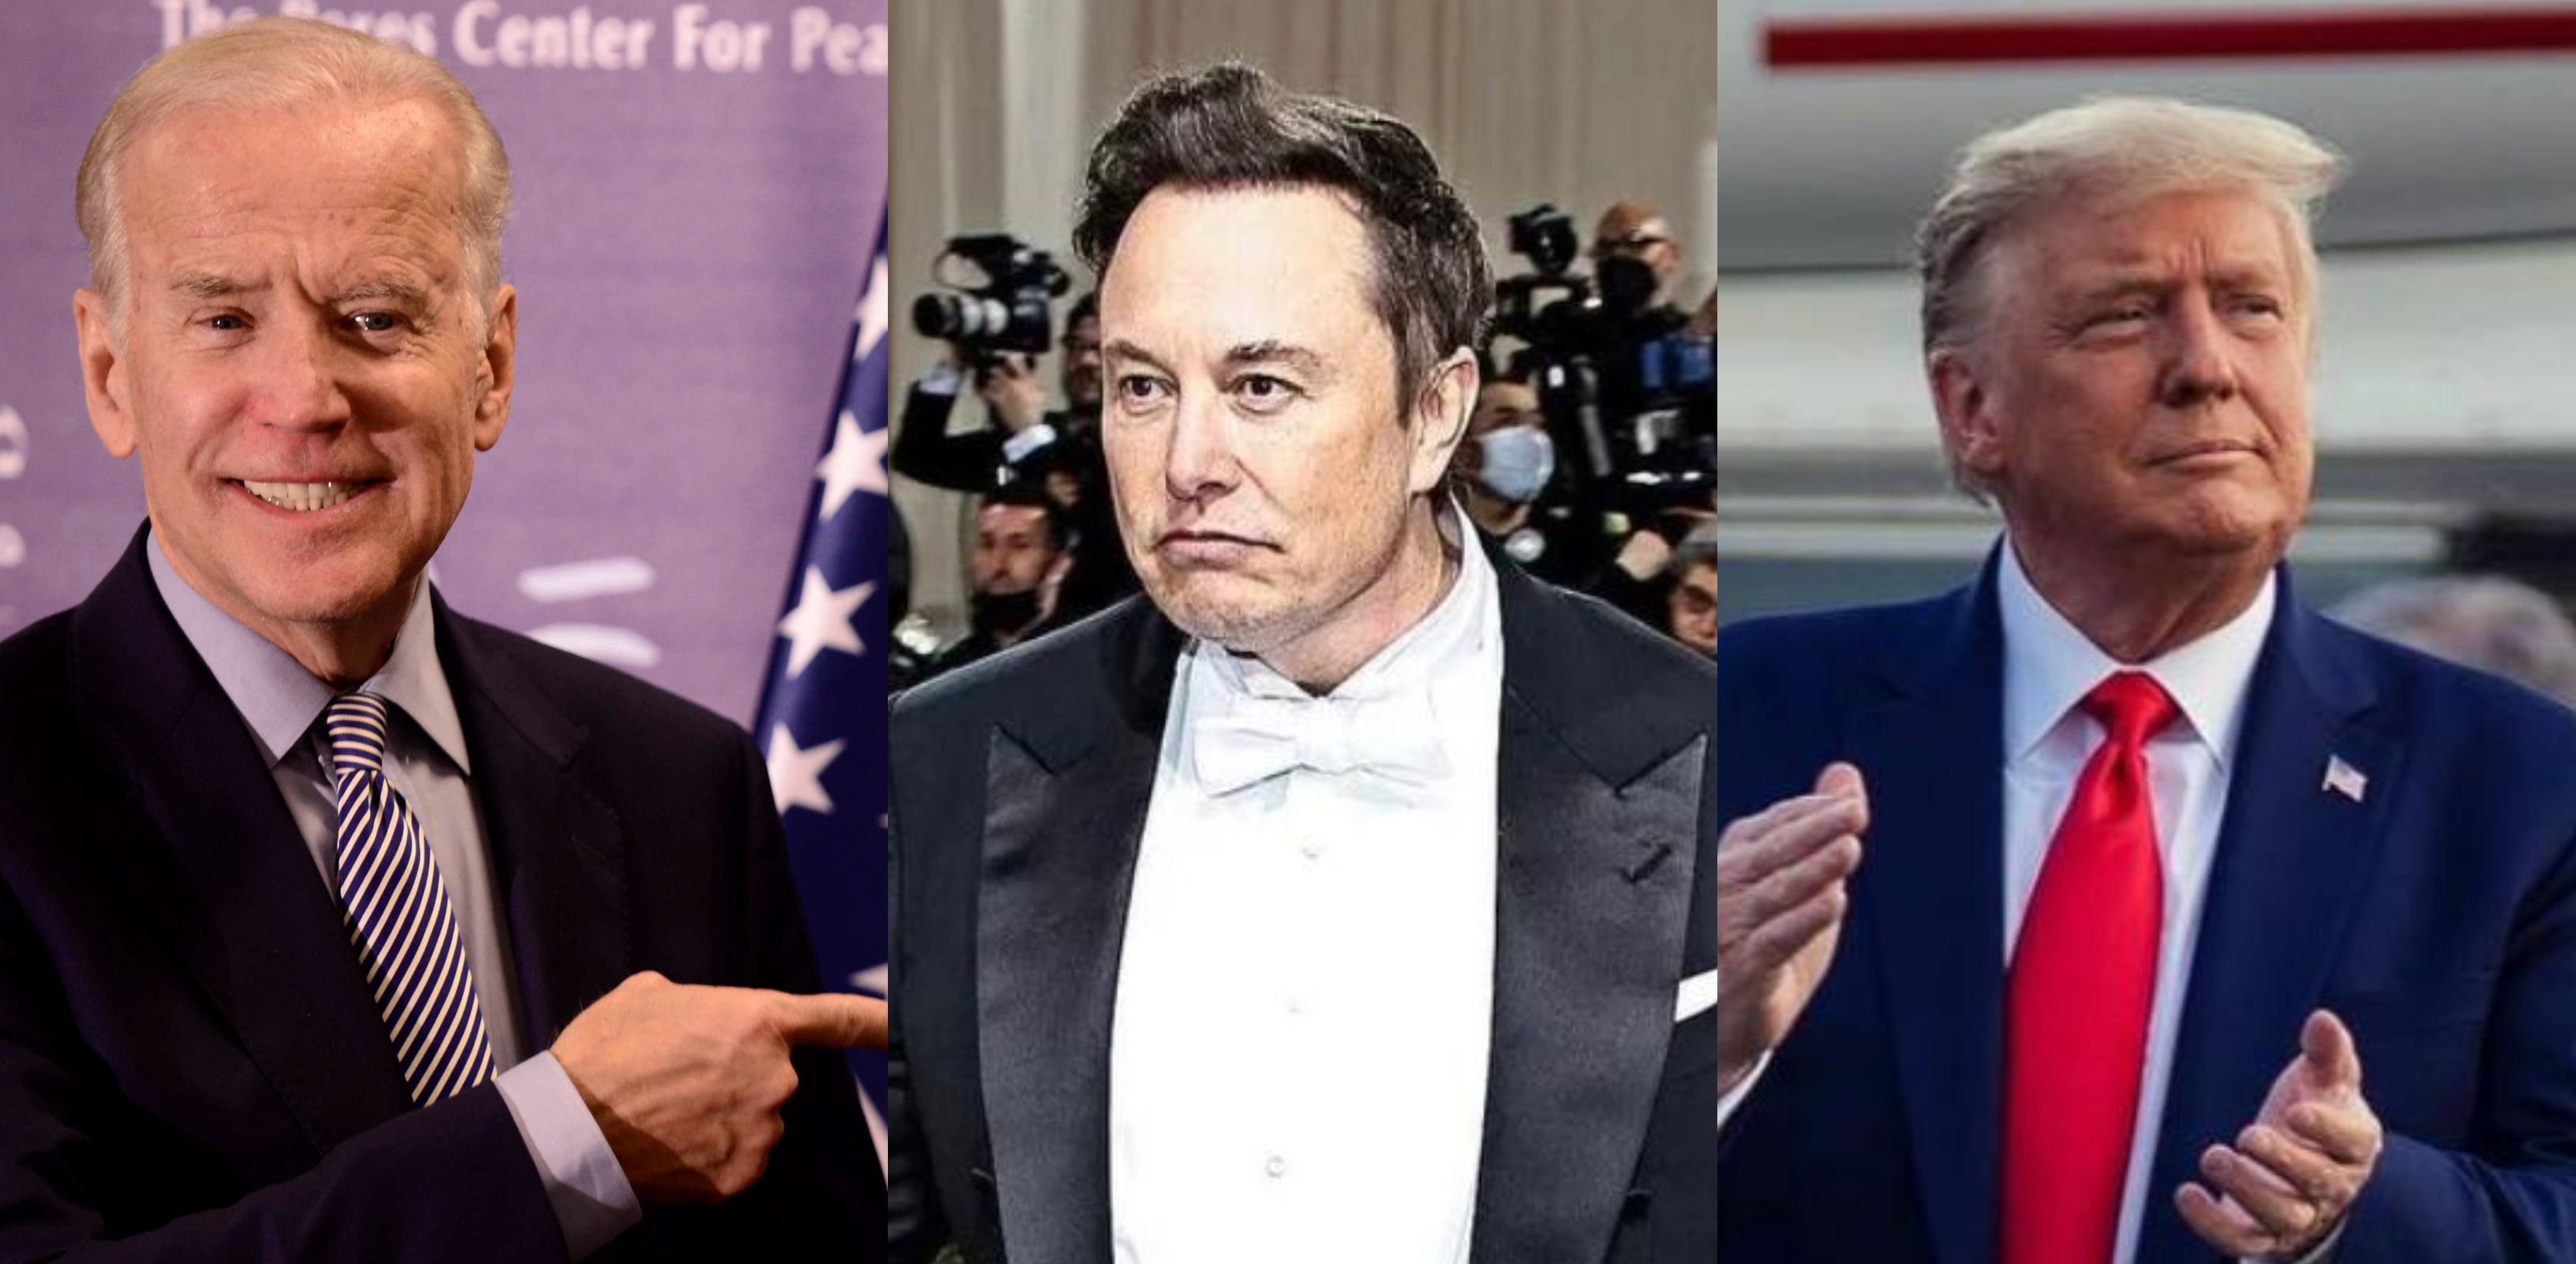 Elon Musk Says He Won’t Vote for Joe Biden in 2024 – Explains Tough Choice Between Trump and Haley